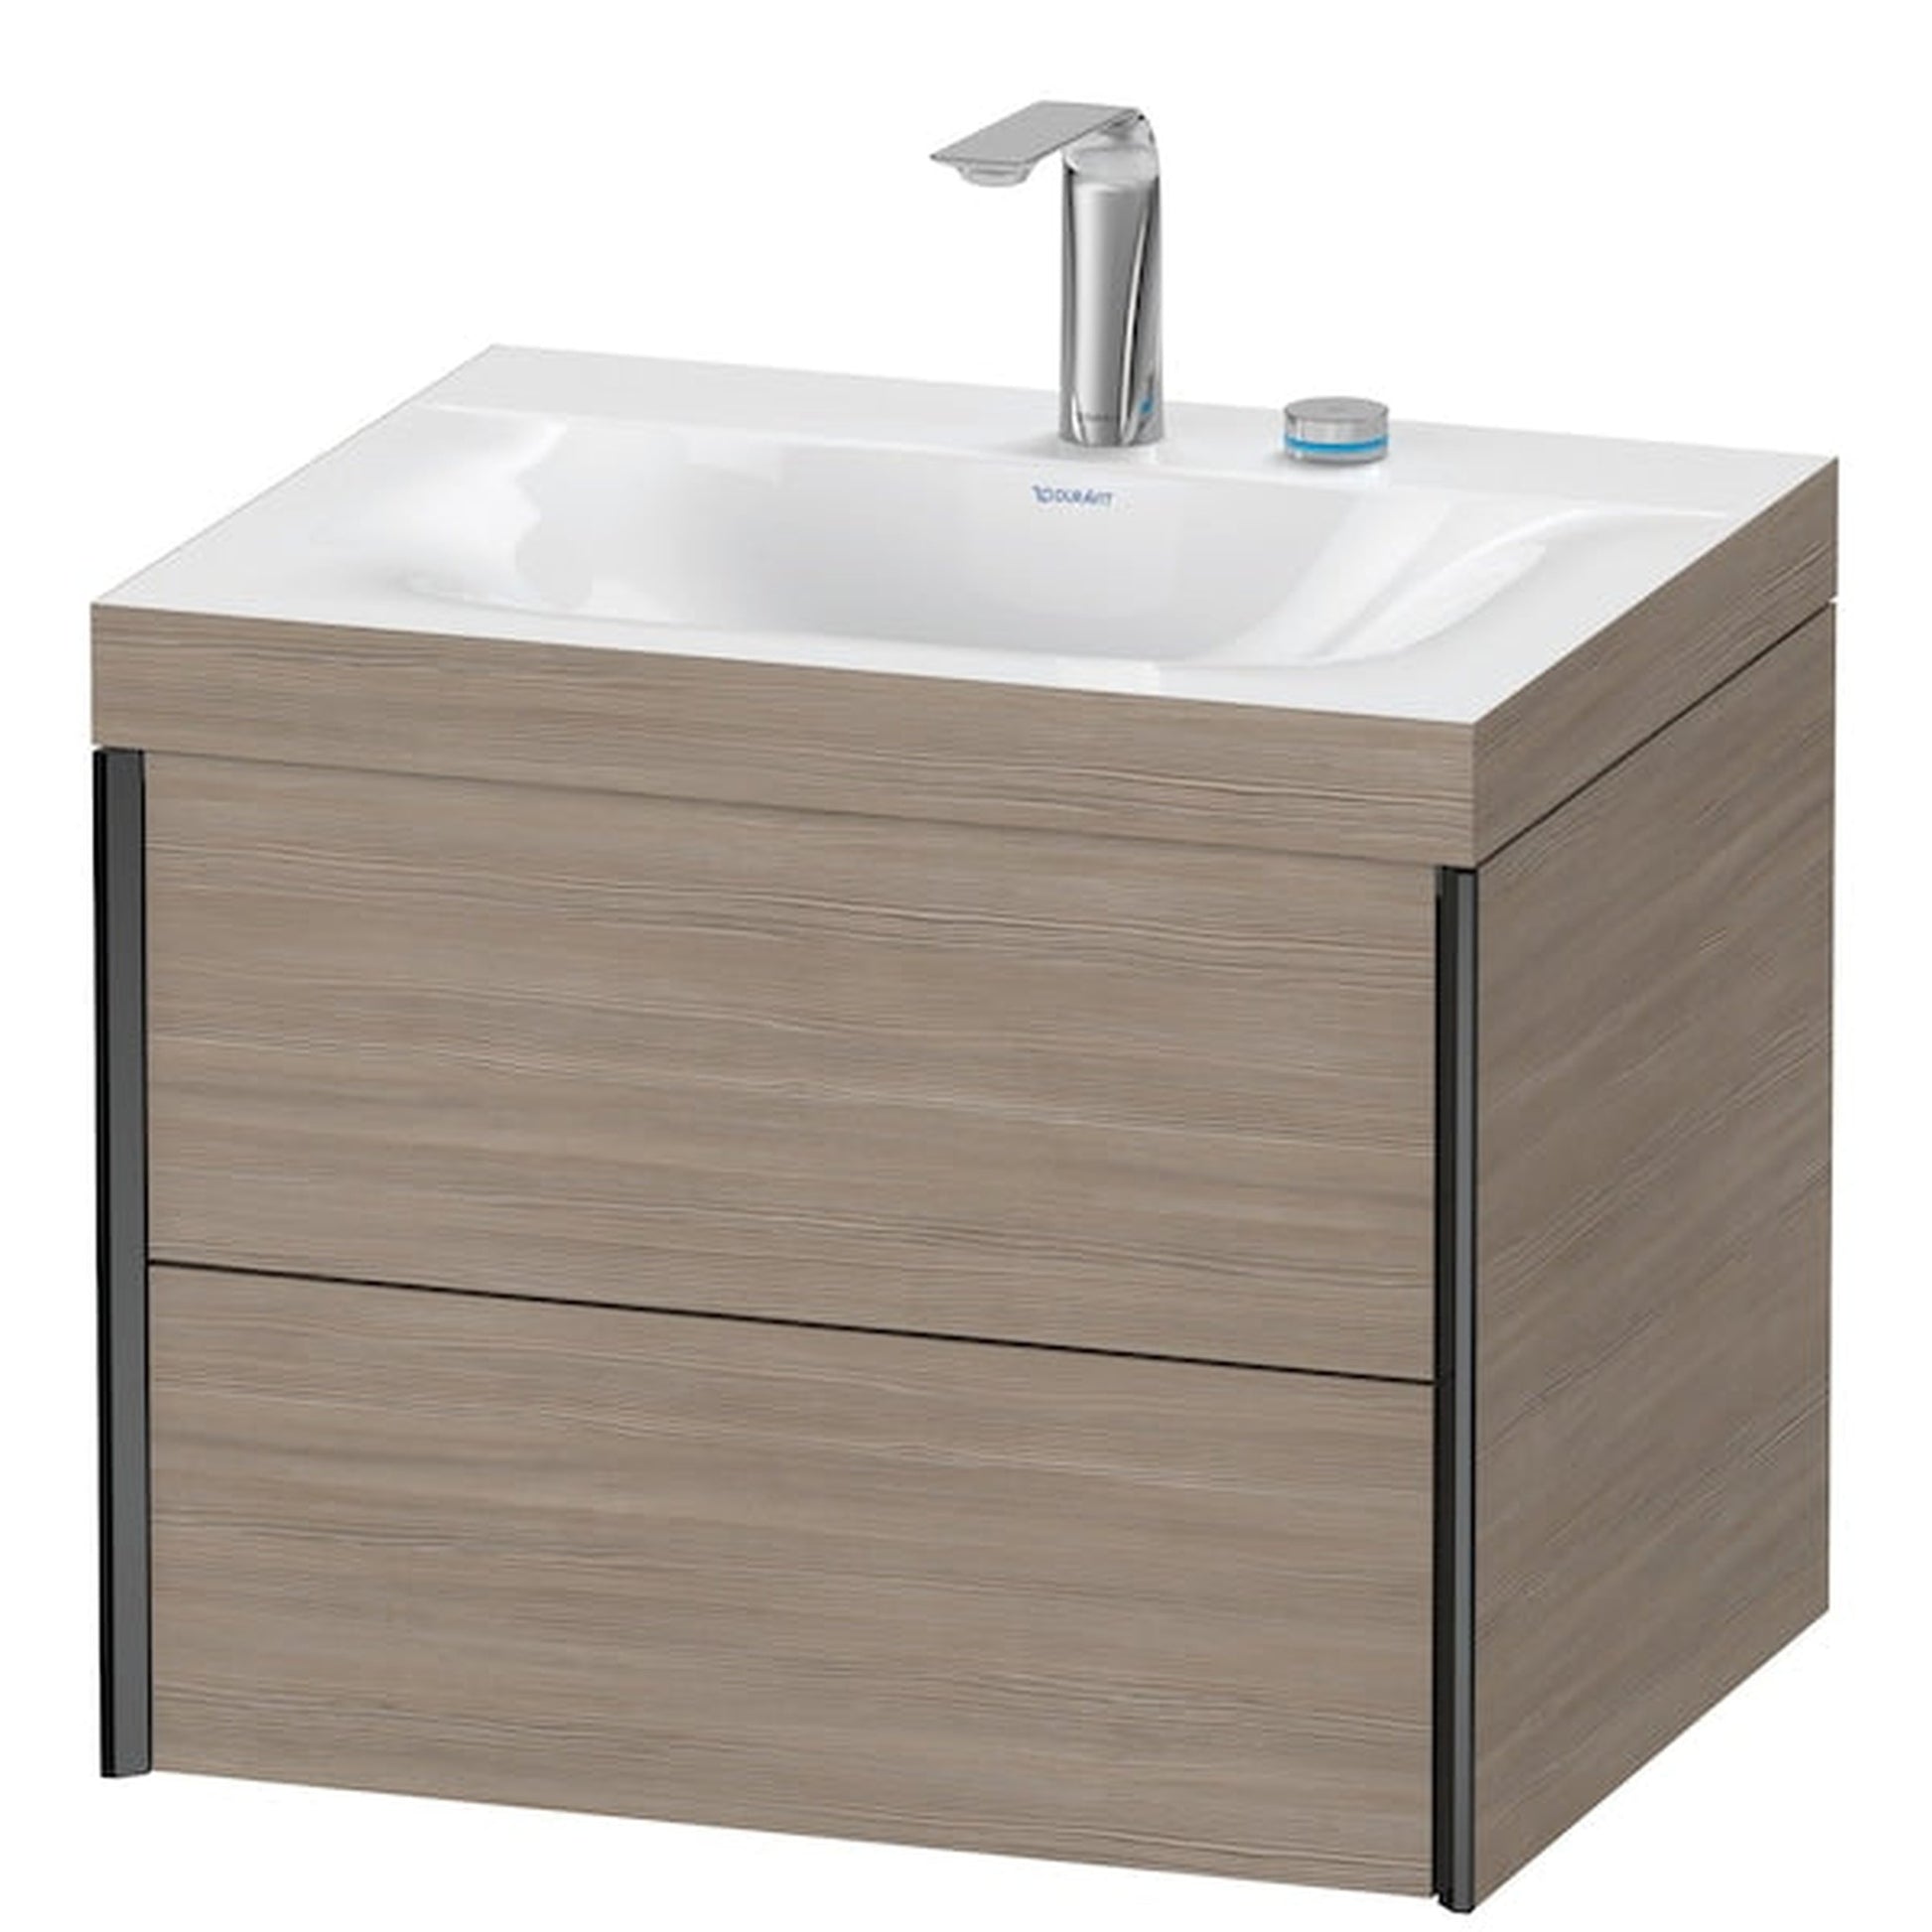 Duravit Xviu 24" x 20" x 19" Two Drawer C-Bonded Wall-Mount Vanity Kit With Two Tap Holes, Silver Pine (XV4614EB231C)